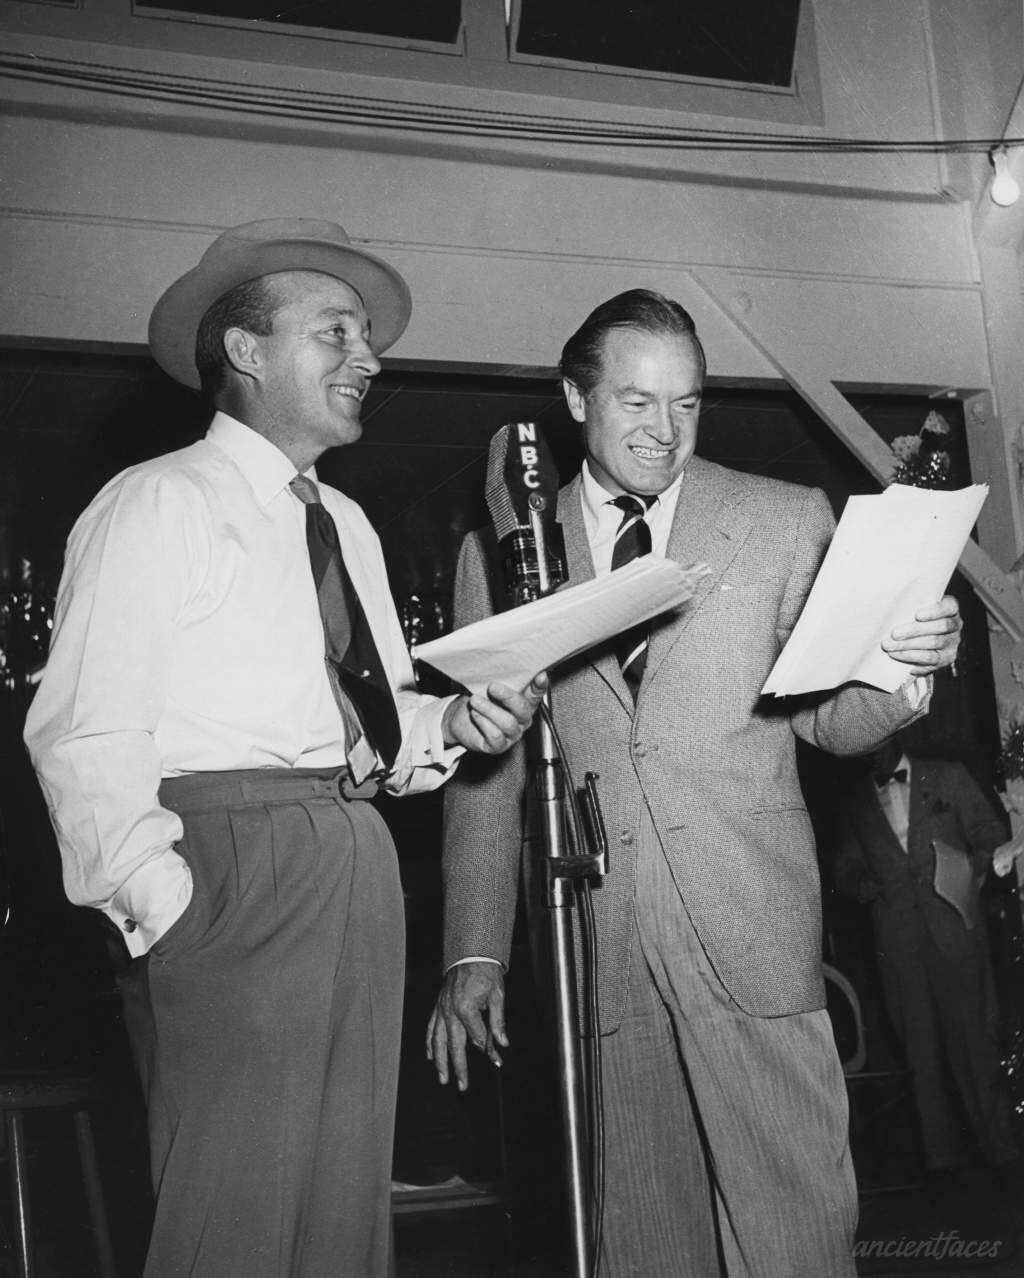 While Bob Hope, right, was a no show, Bing Crosby gave the troops something to think about one memorable Christmas on a lonely pier on Cam Rahn Bay.